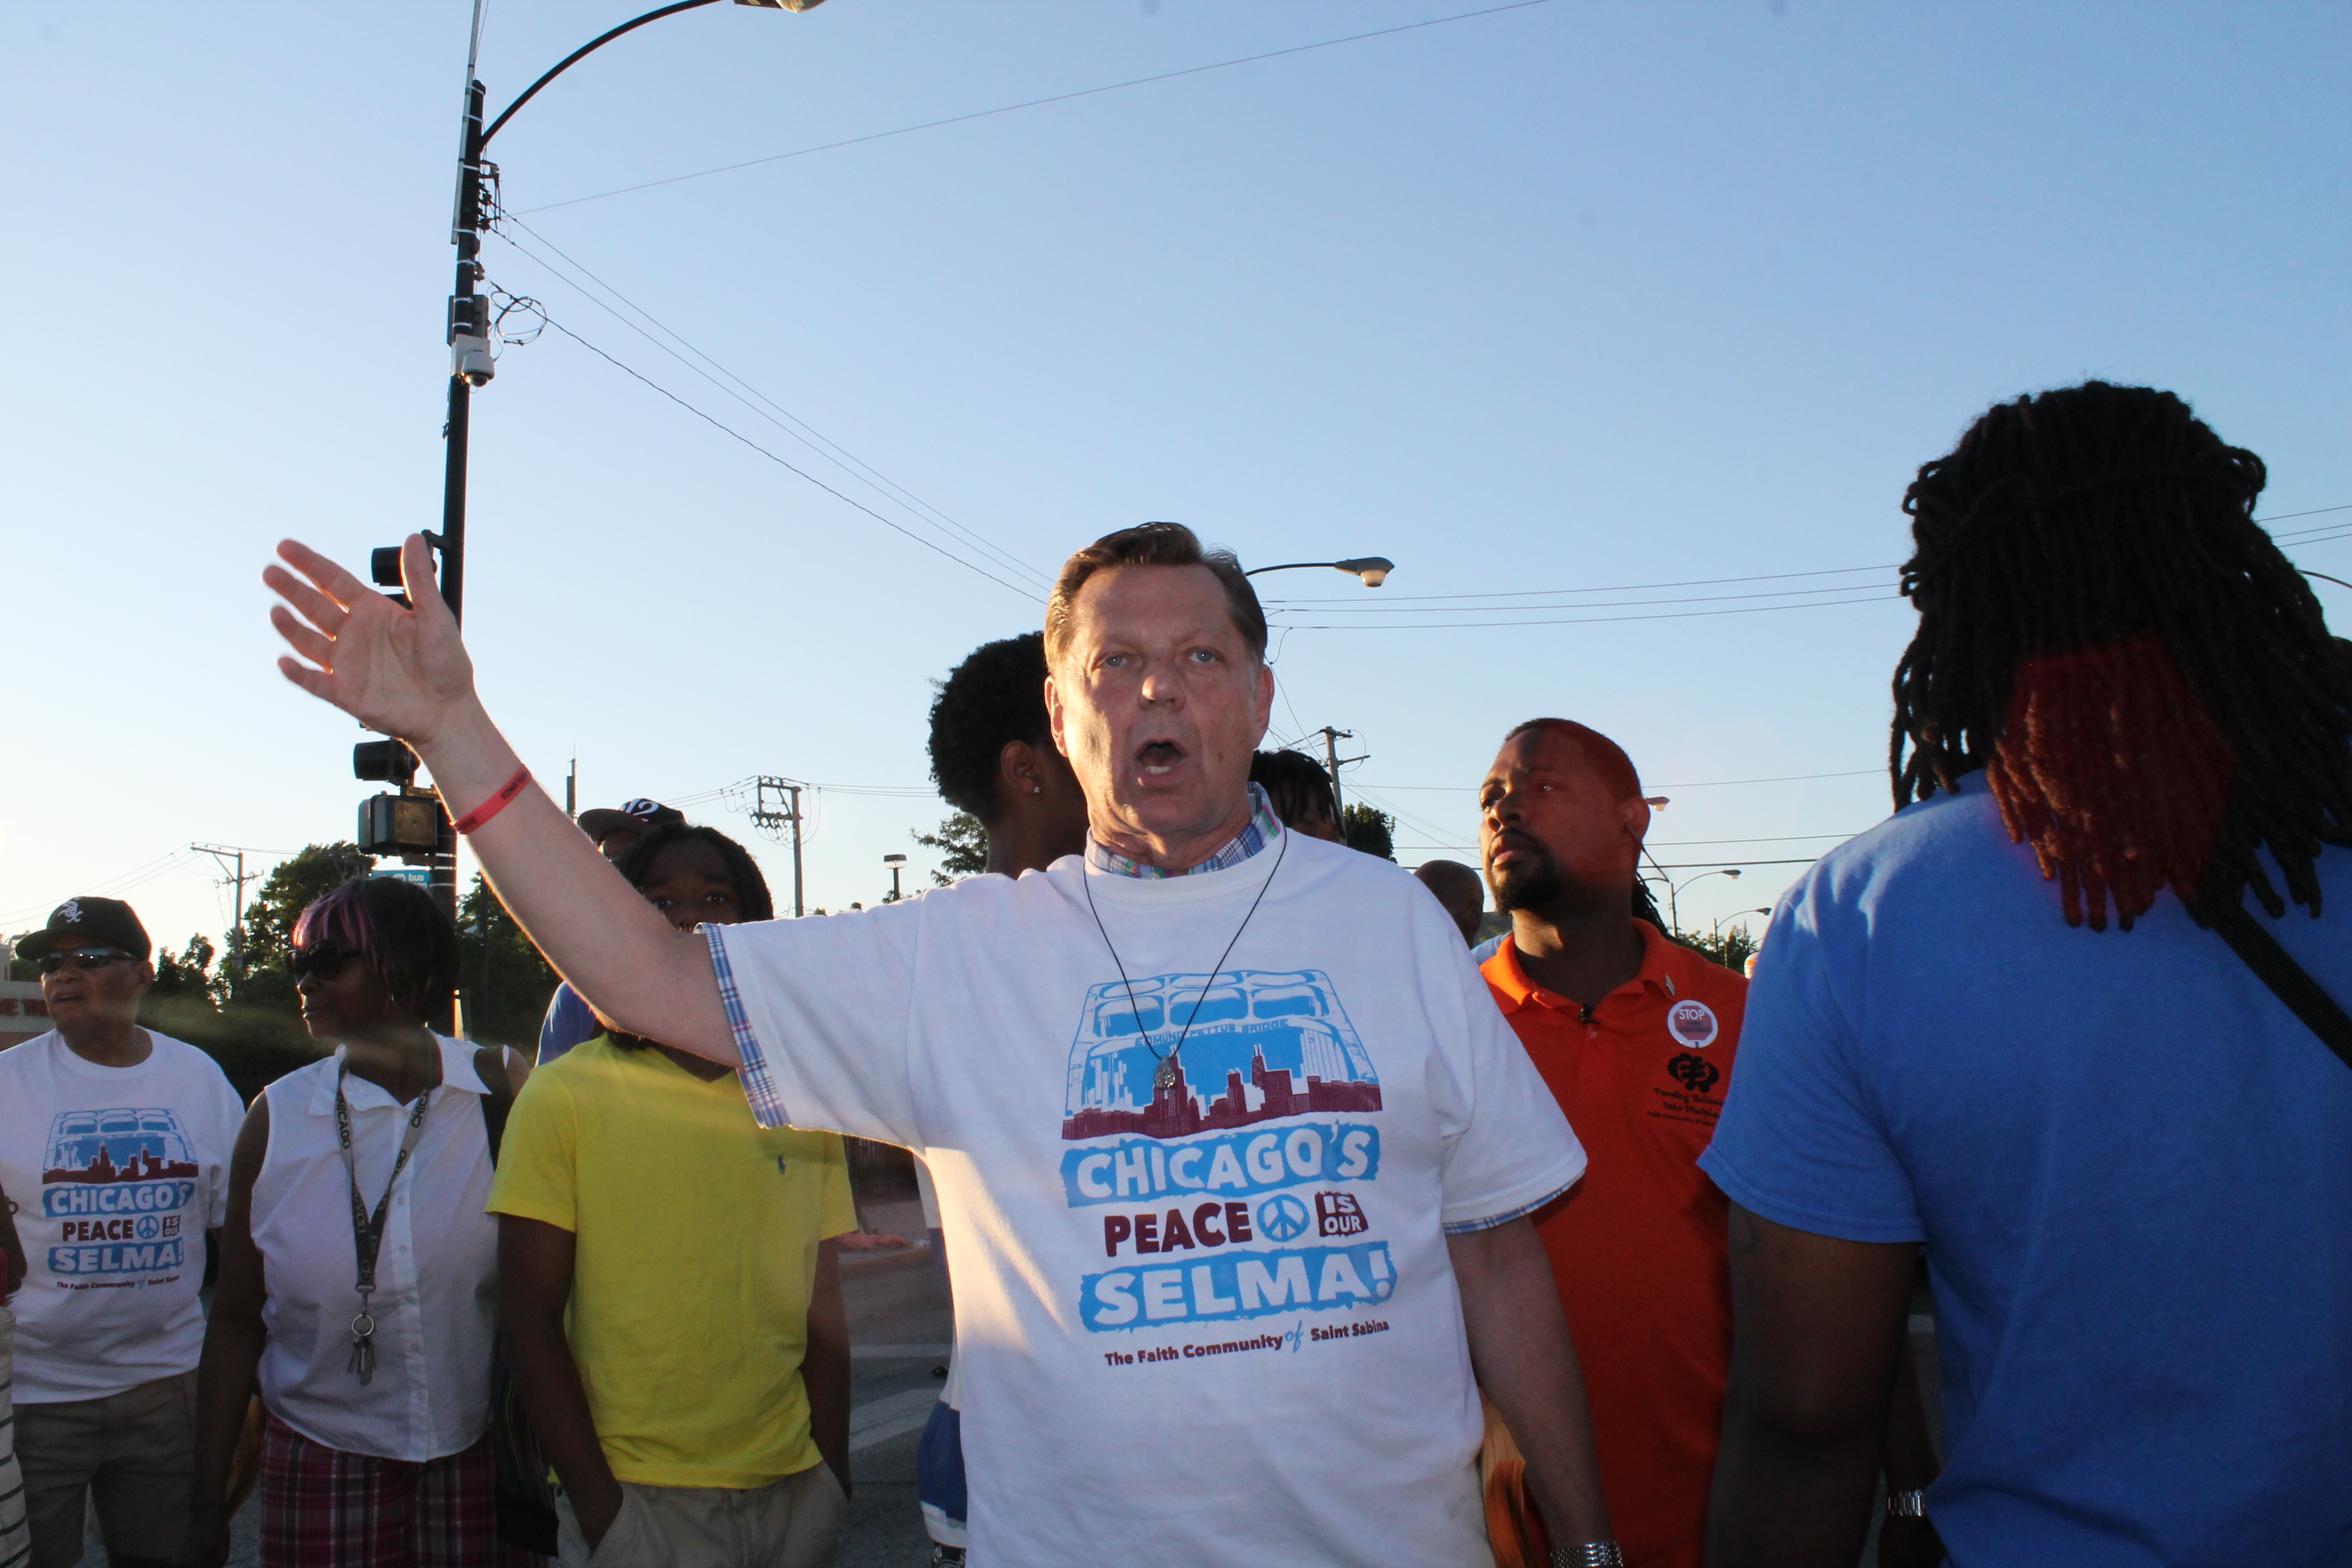 Father Pfleger calls for peace to prevail at 79th and Halsted 